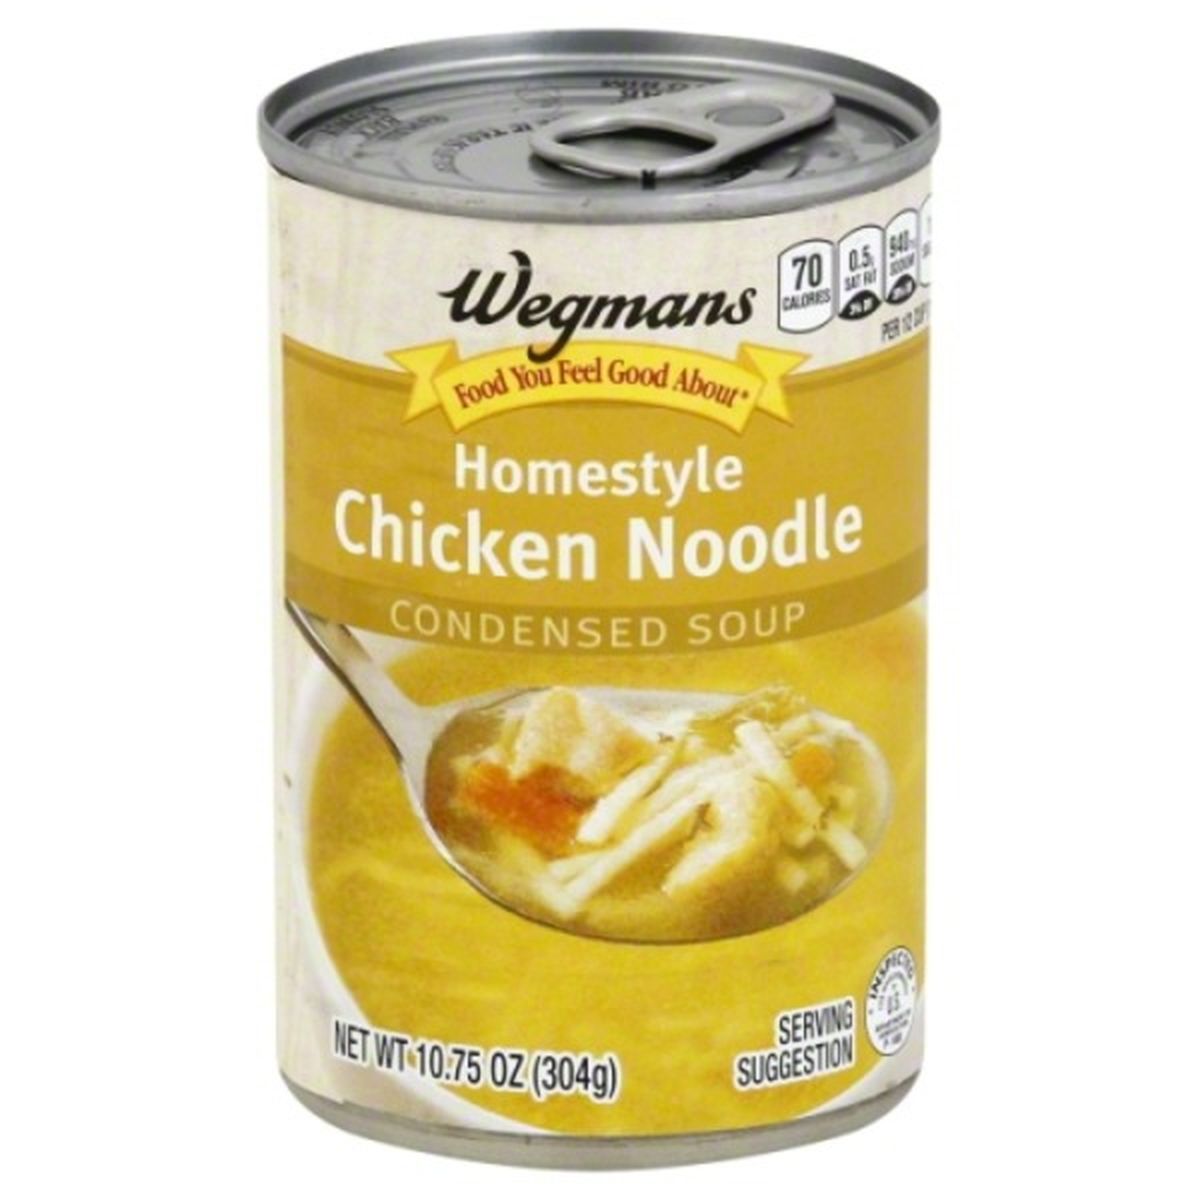 Calories in Wegmans Condensed Homestyle Chicken Noodle Soup